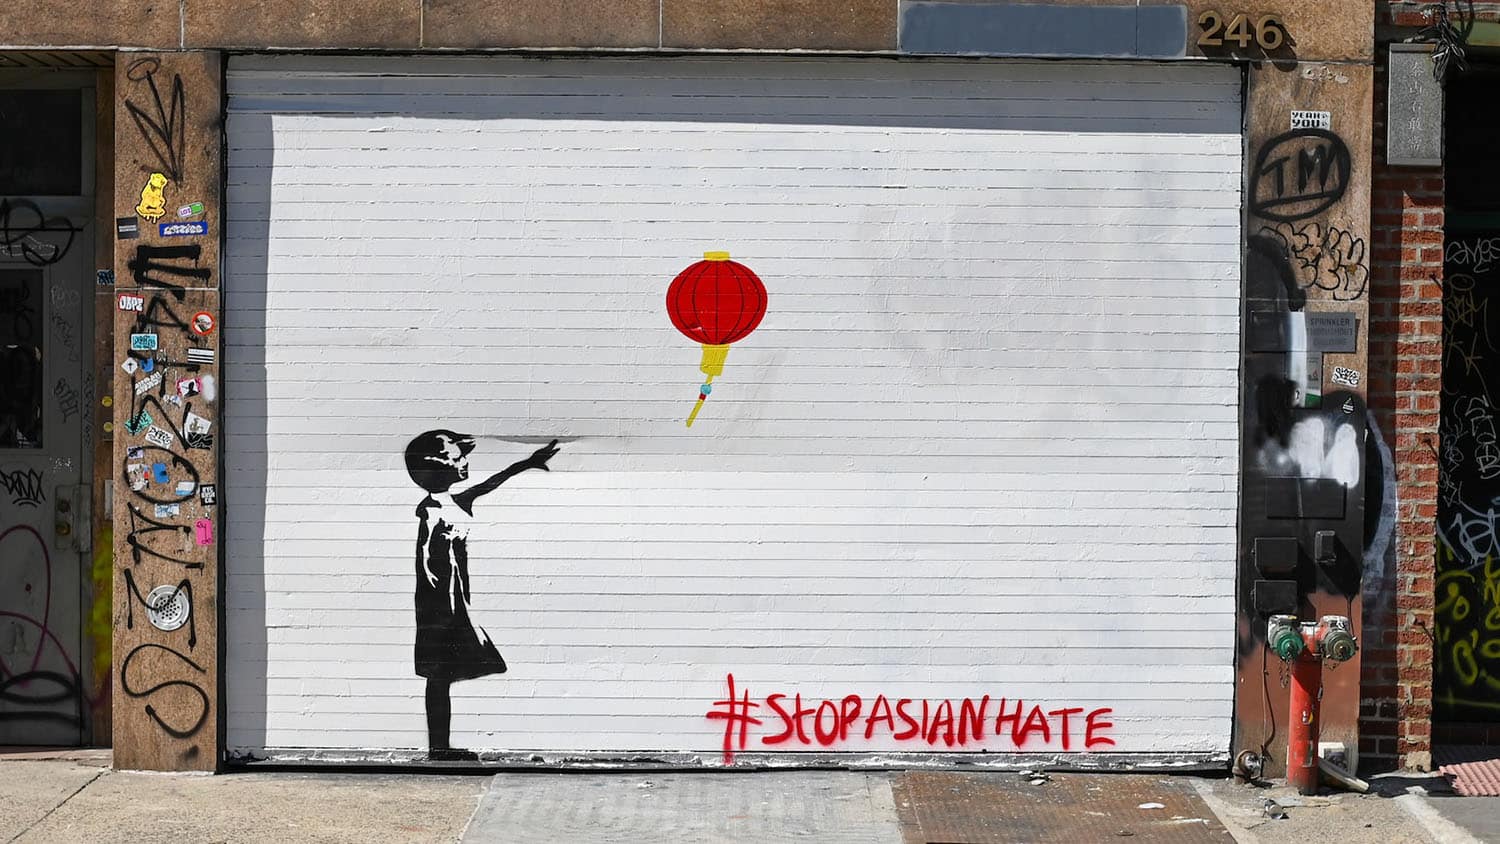 painting shows a child in silhouette as a red lantern drifts away from her hand. The hashtag #StopAsianHate is written near the bottom